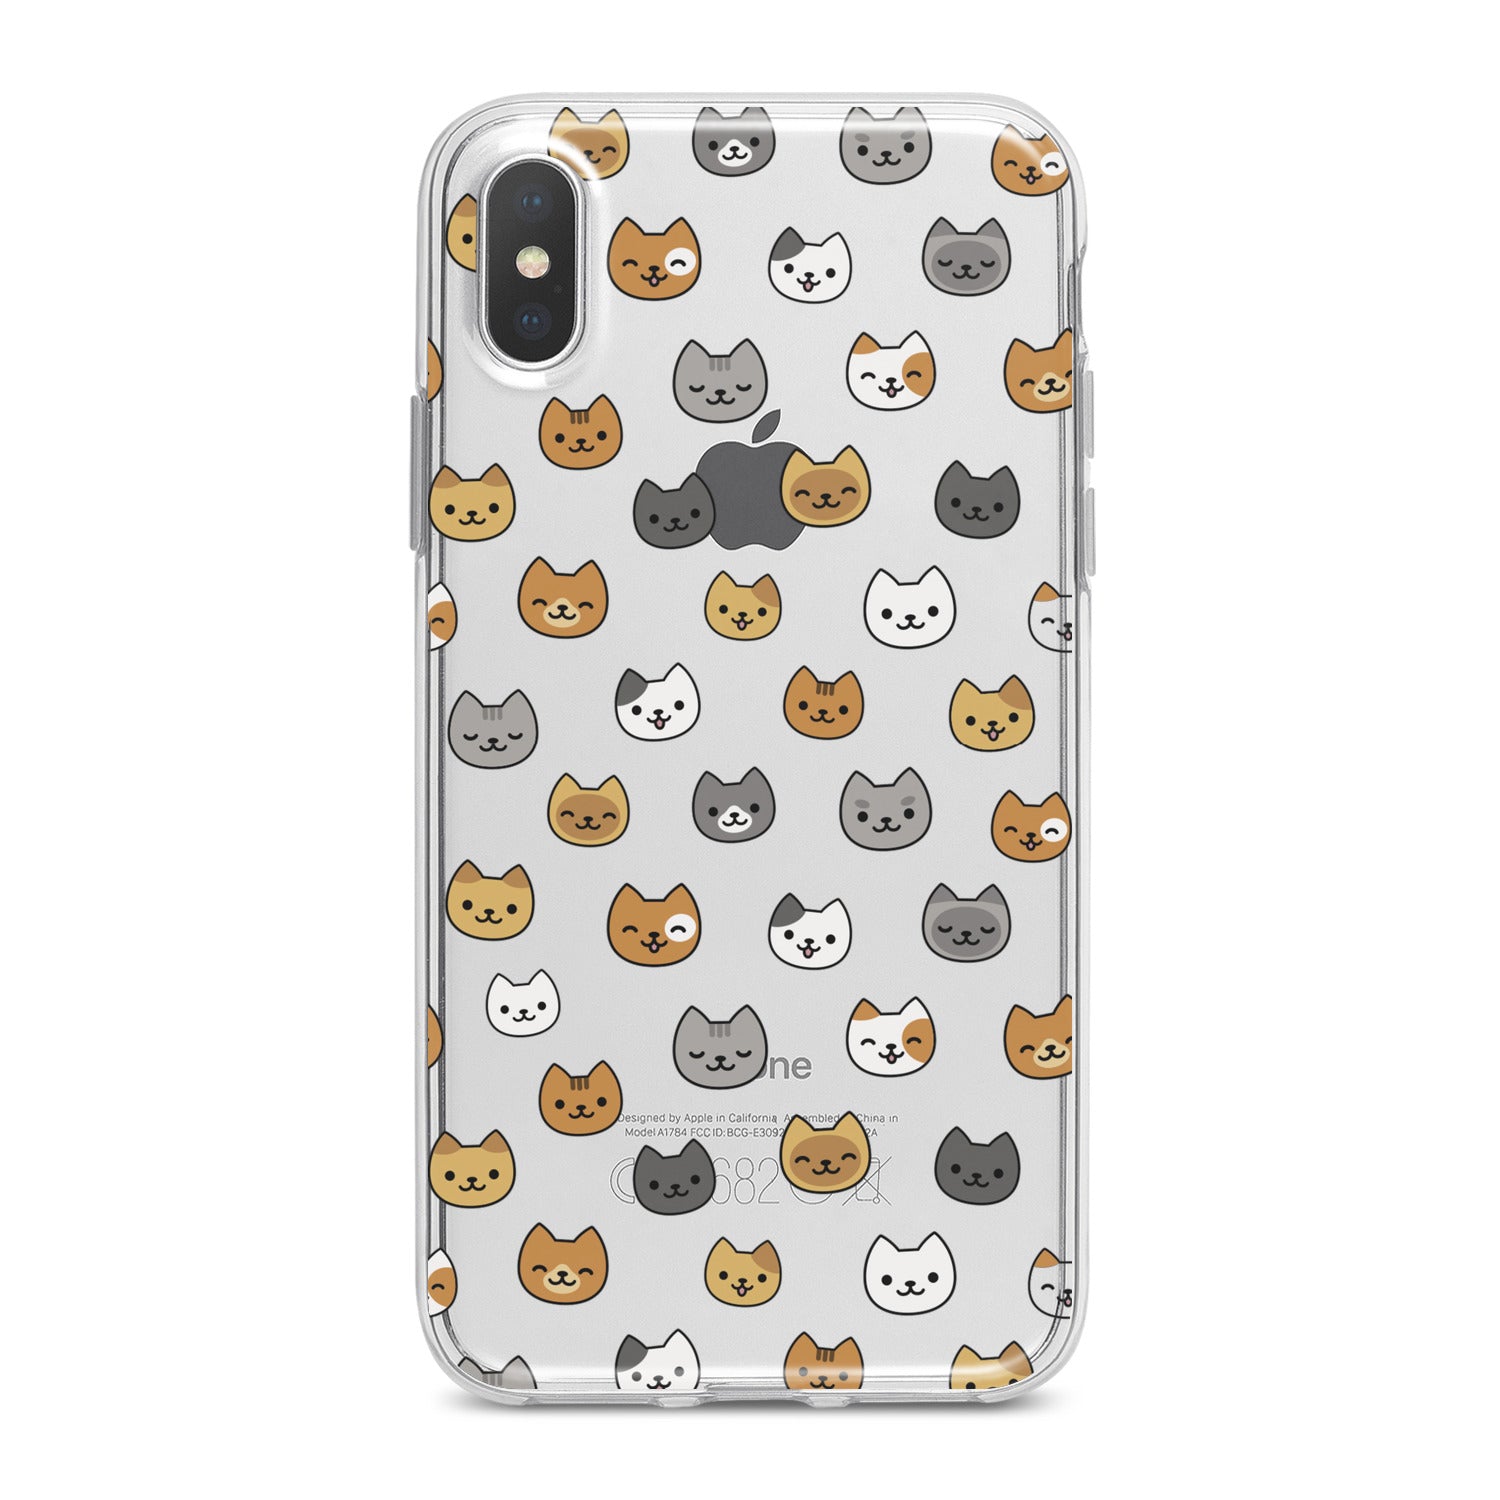 Lex Altern Cats Pattern Phone Case for your iPhone & Android phone.